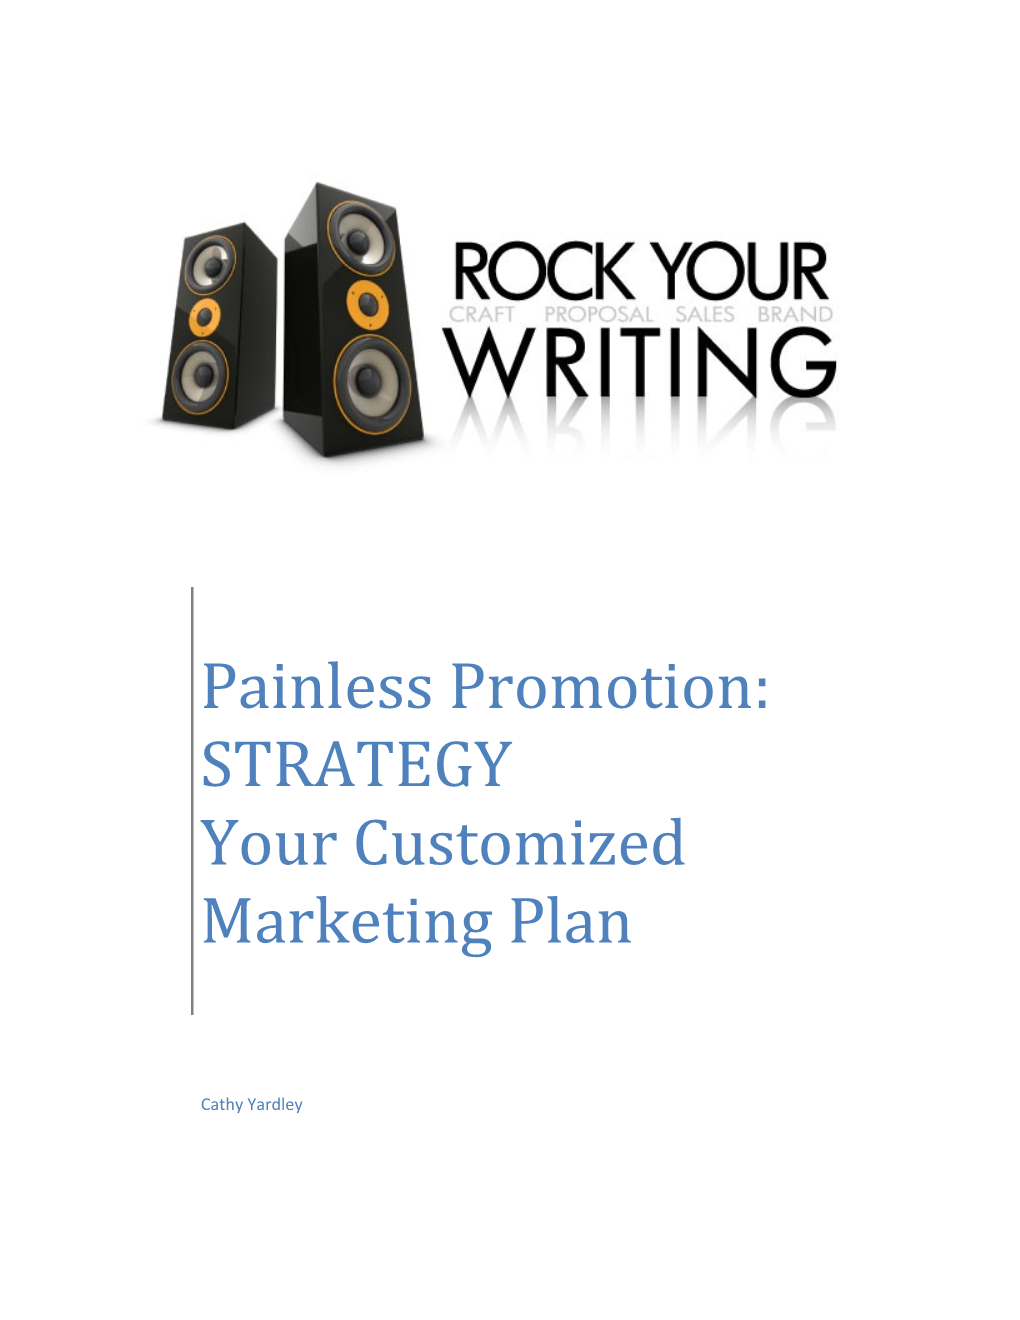 Painless Promotion: Your Customized Marketing Plan